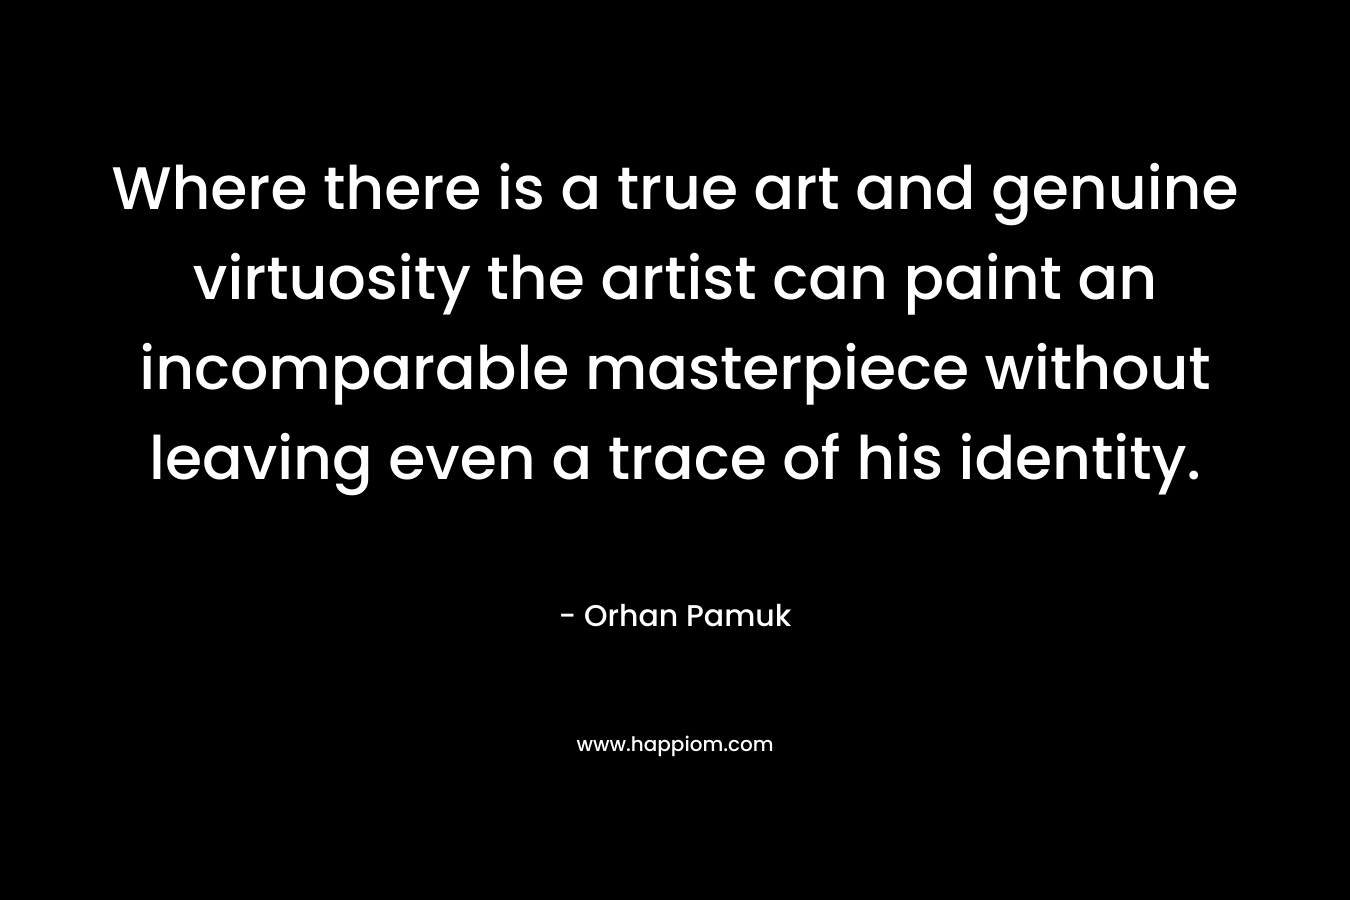 Where there is a true art and genuine virtuosity the artist can paint an incomparable masterpiece without leaving even a trace of his identity. – Orhan Pamuk